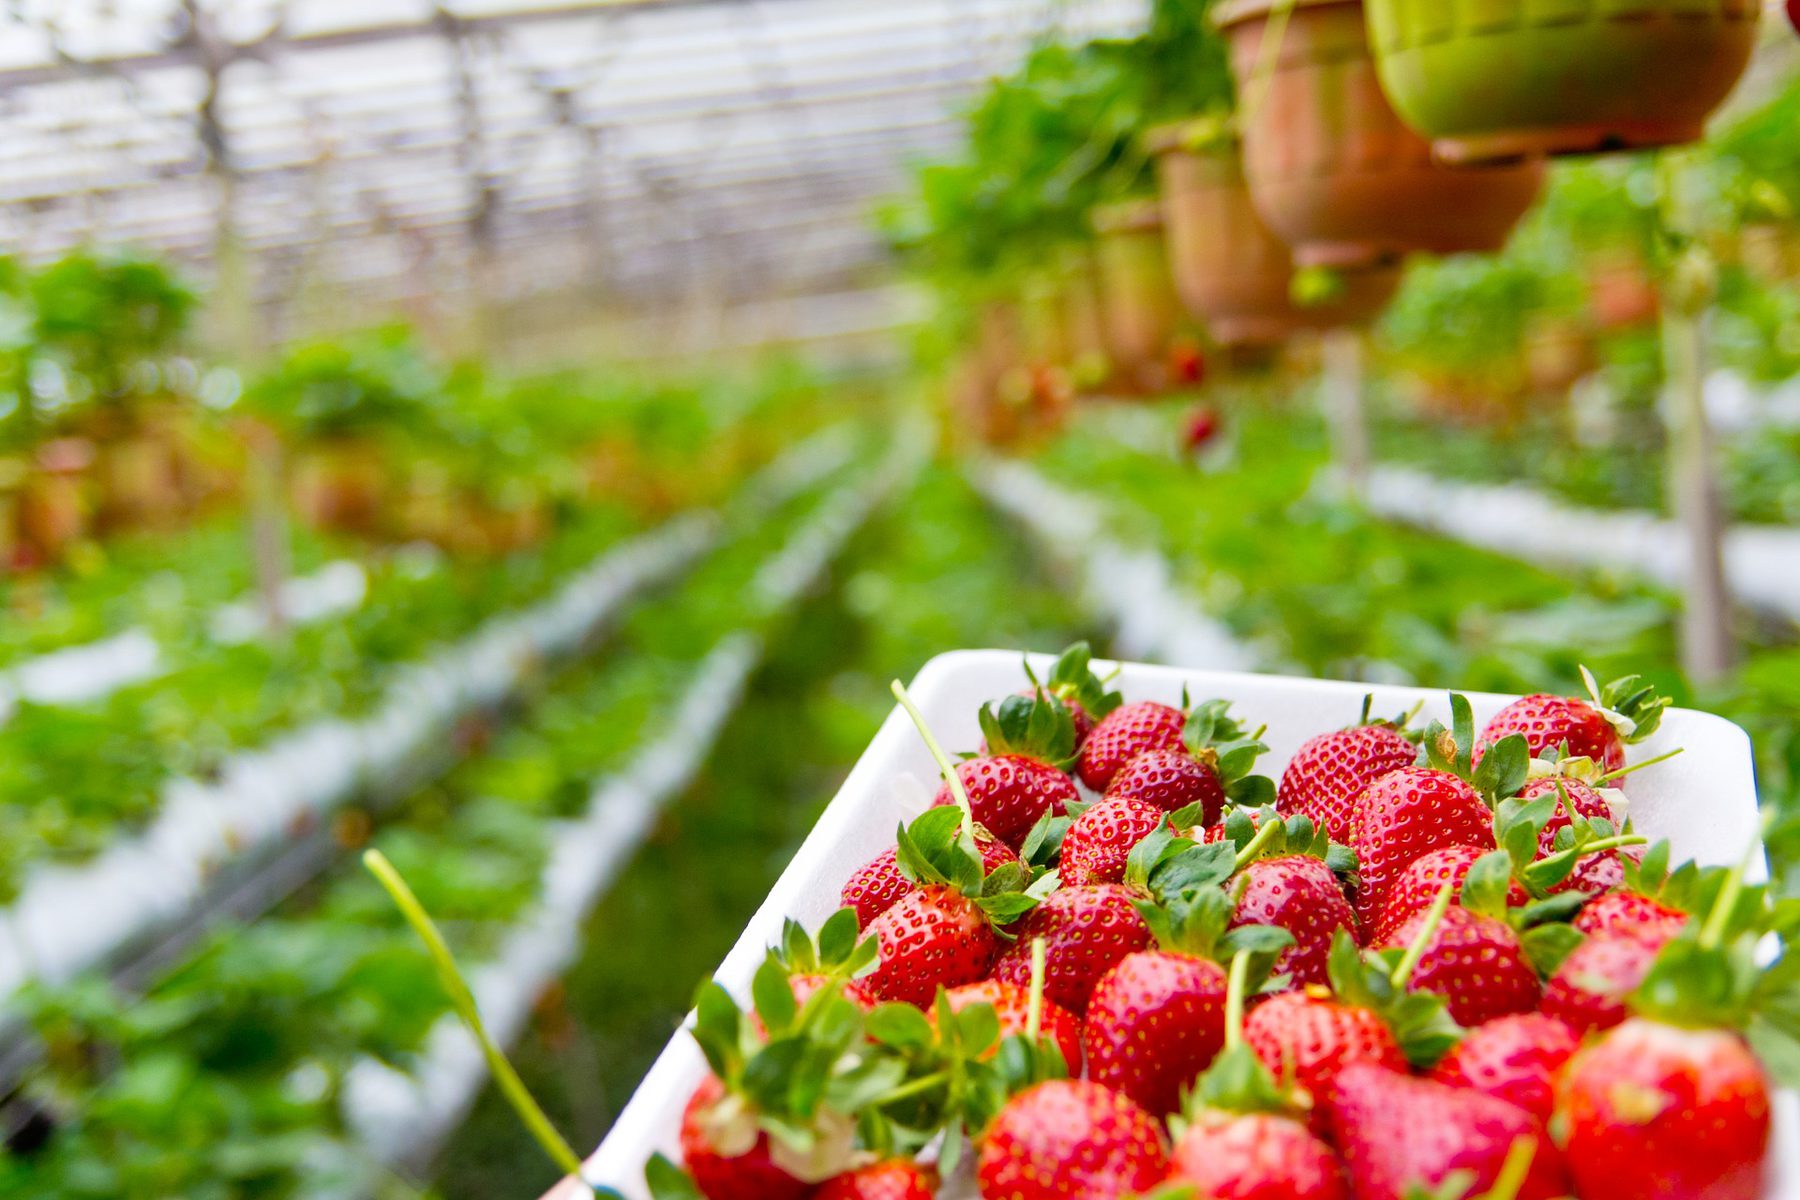 Horticulture (Sector Header: Strawberry Picking)